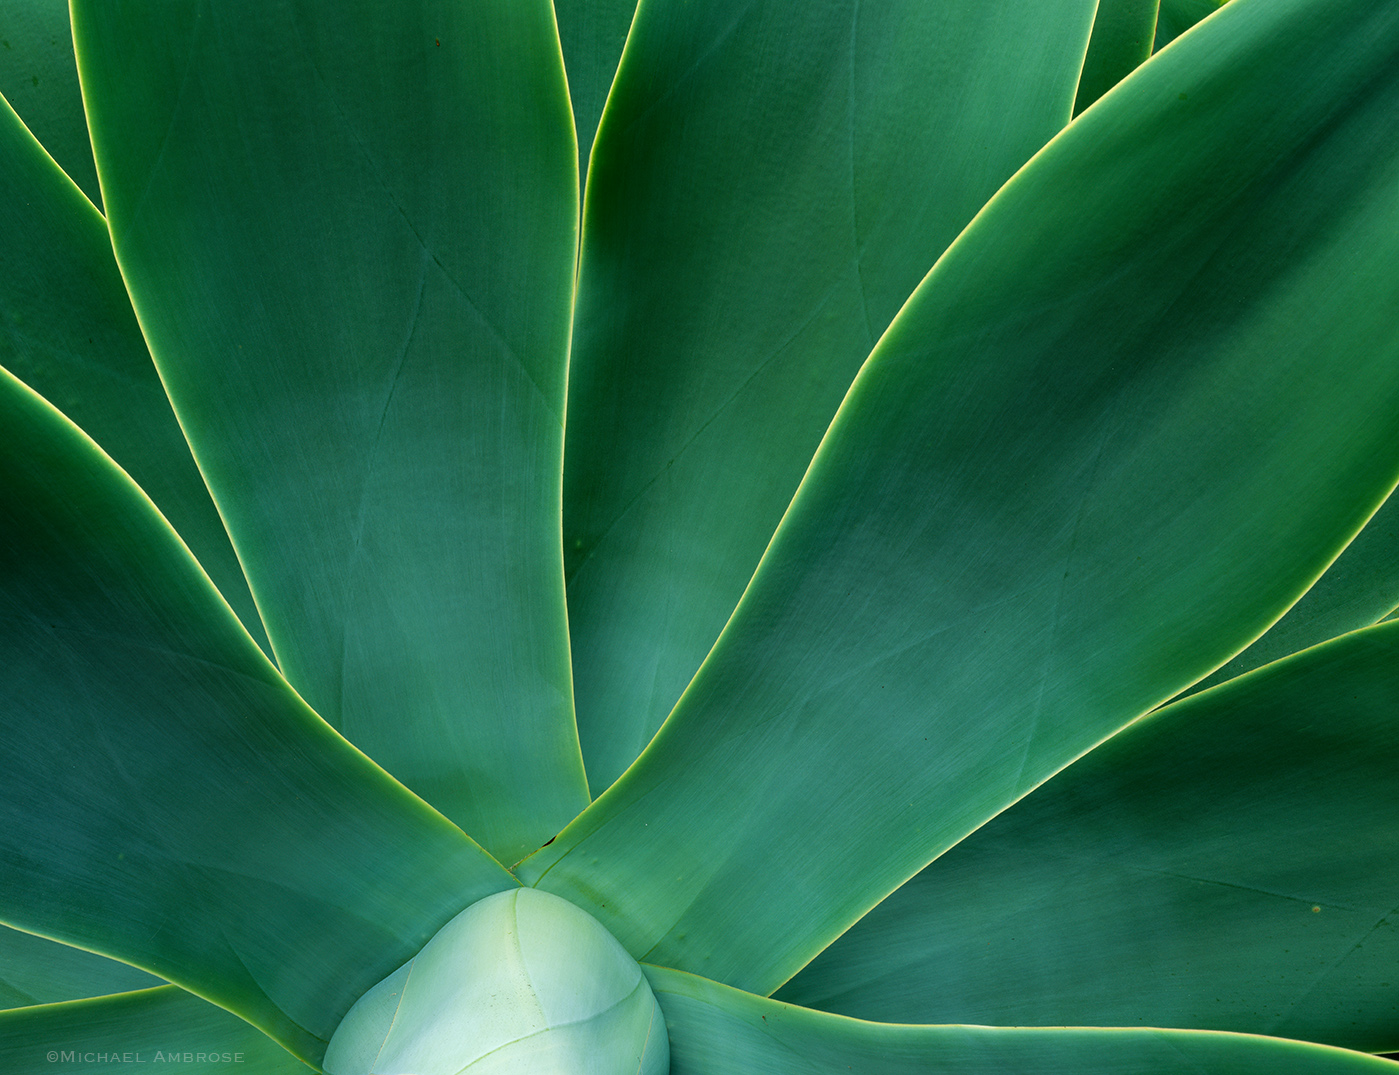 The Blue Agave plant fells like a quintessential Southern California staple.